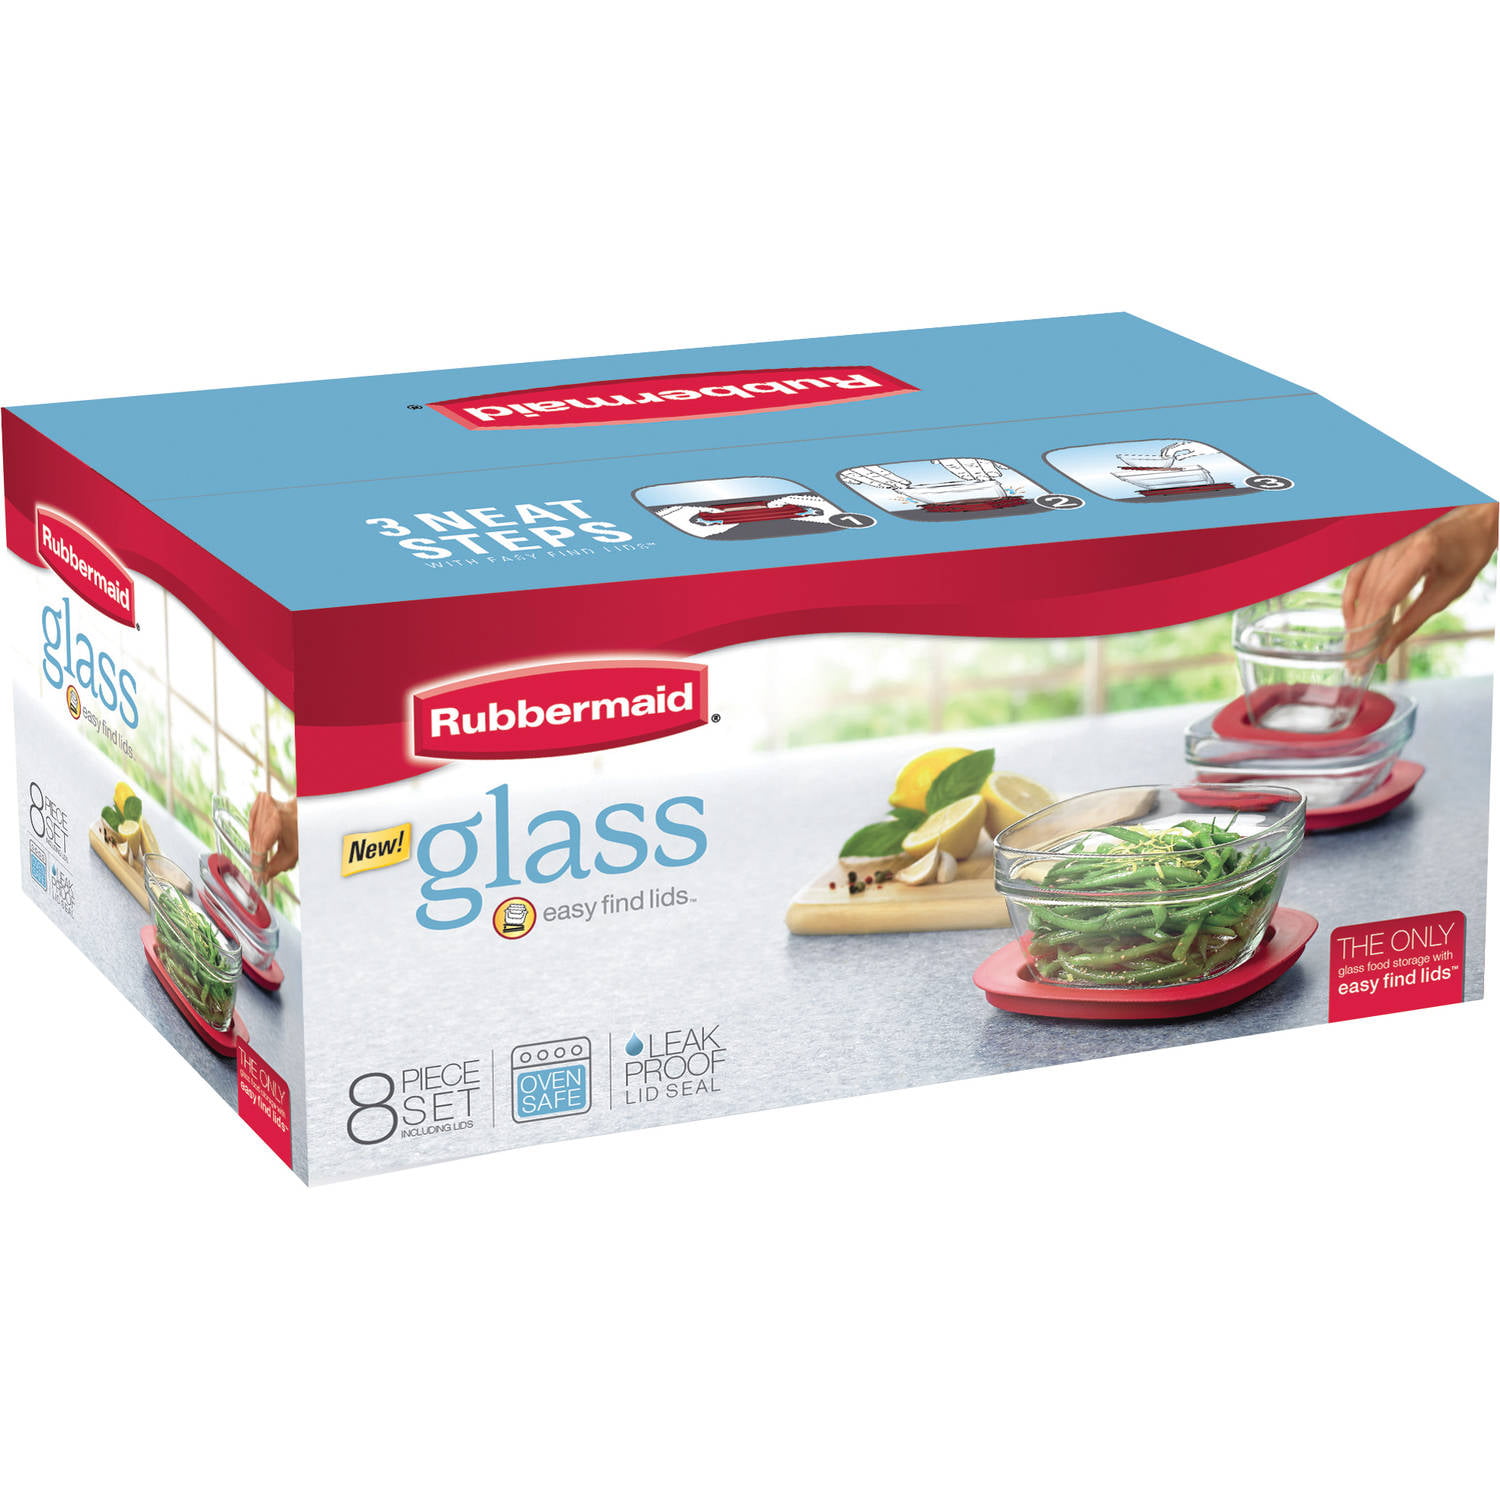 Rubbermaid Easy Find Lids Glass Food Storage Containers Set, 8